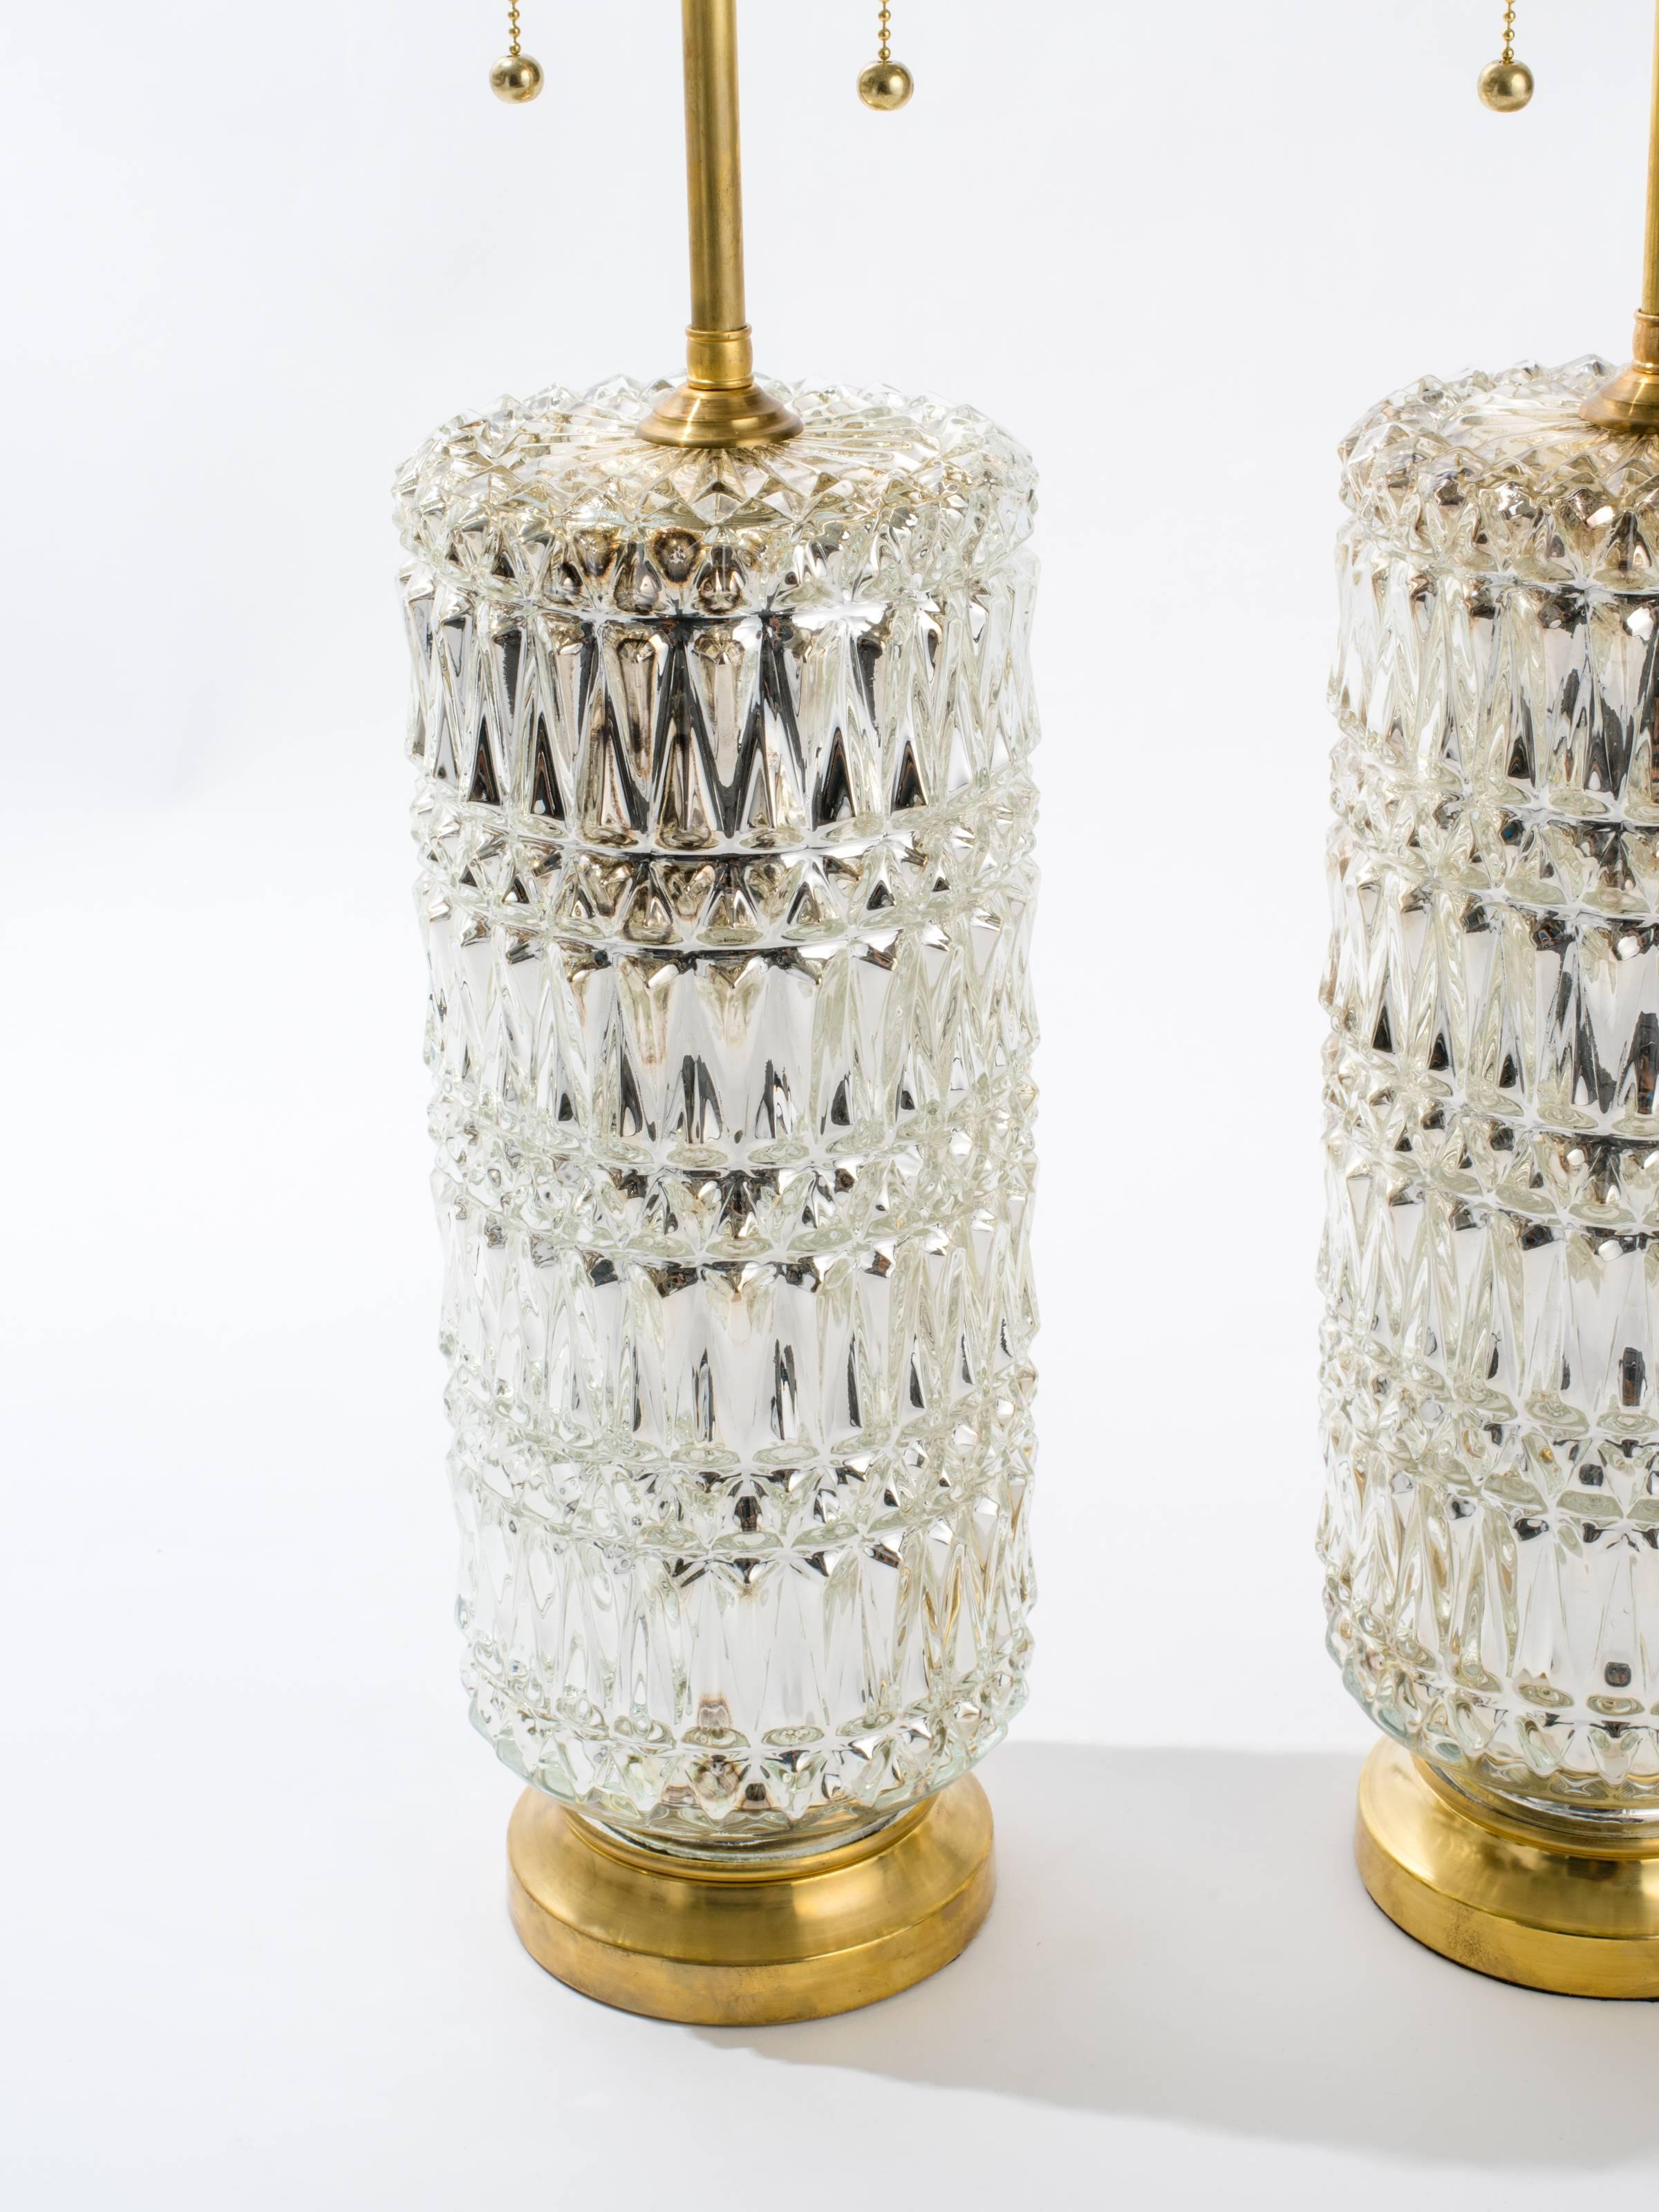 American Textured Mercury Glass Lamps For Sale